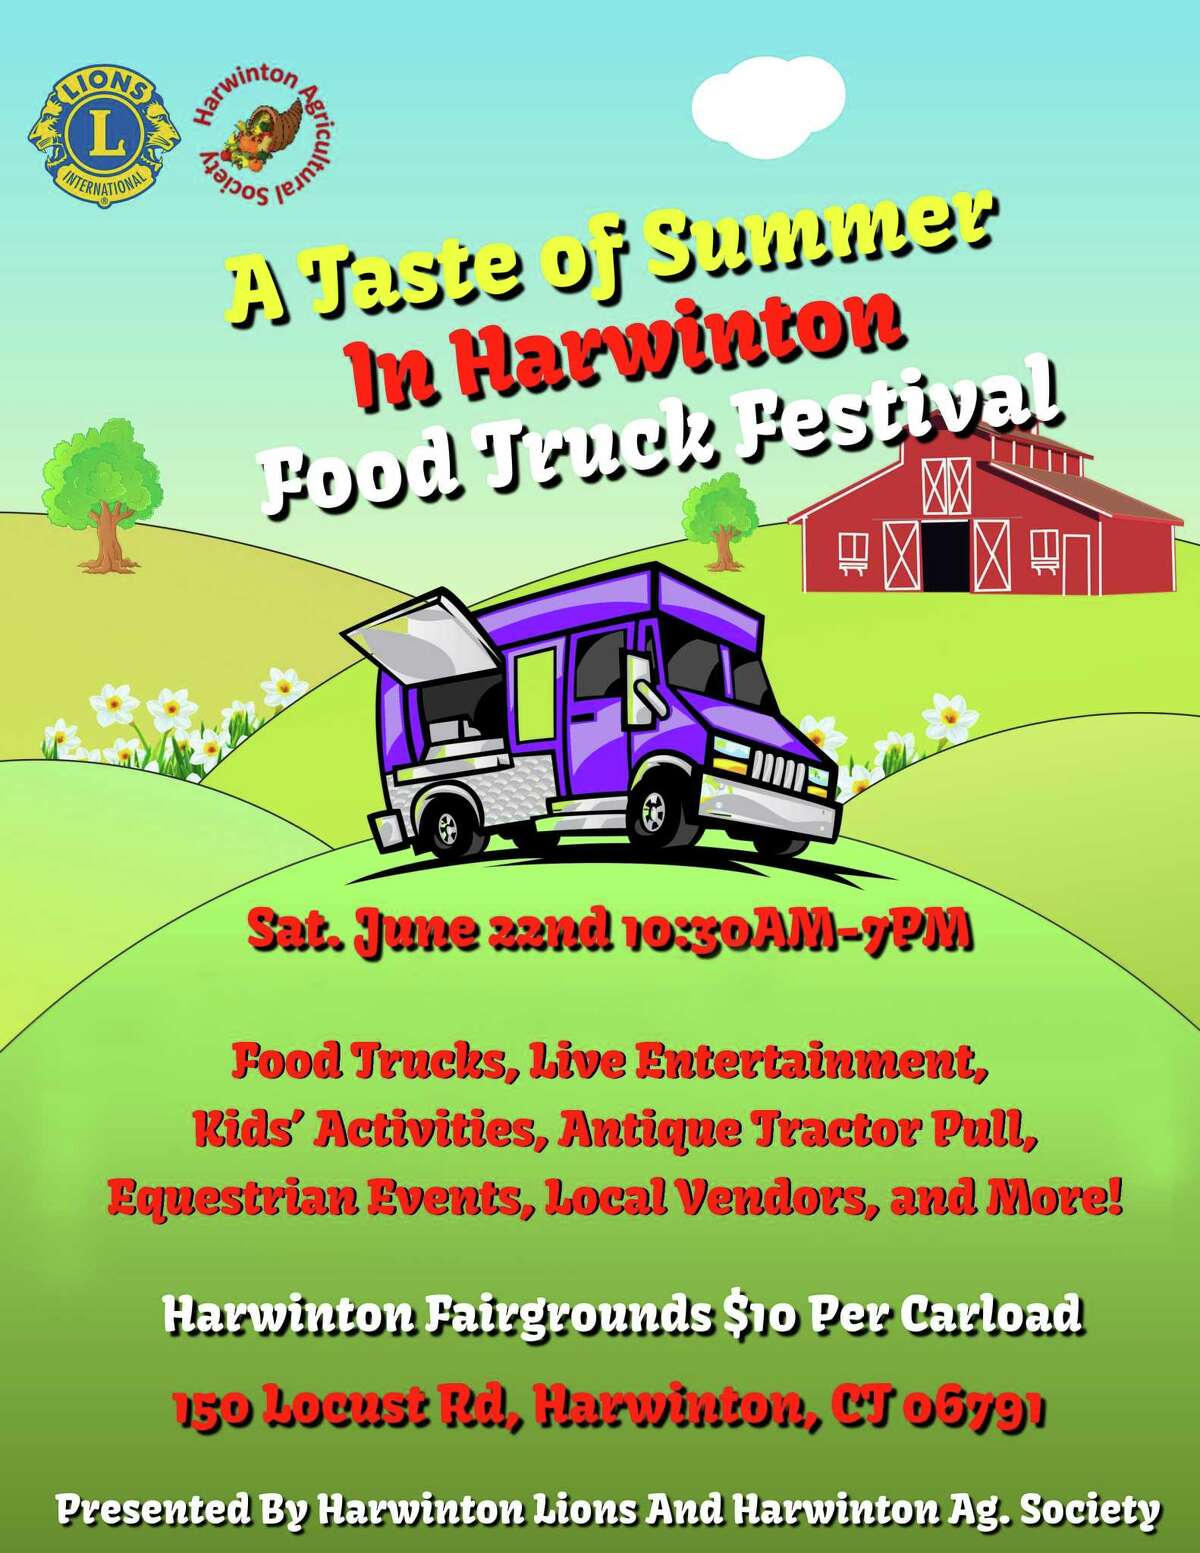 The Harwinton Lions Club and the Harwinton Agricultural Society will present Taste of Summer in Harwinton on Saturday, 10:30 a.m. to 7 p.m. at the Harwinton Fairgrounds, 150 Locust Road.